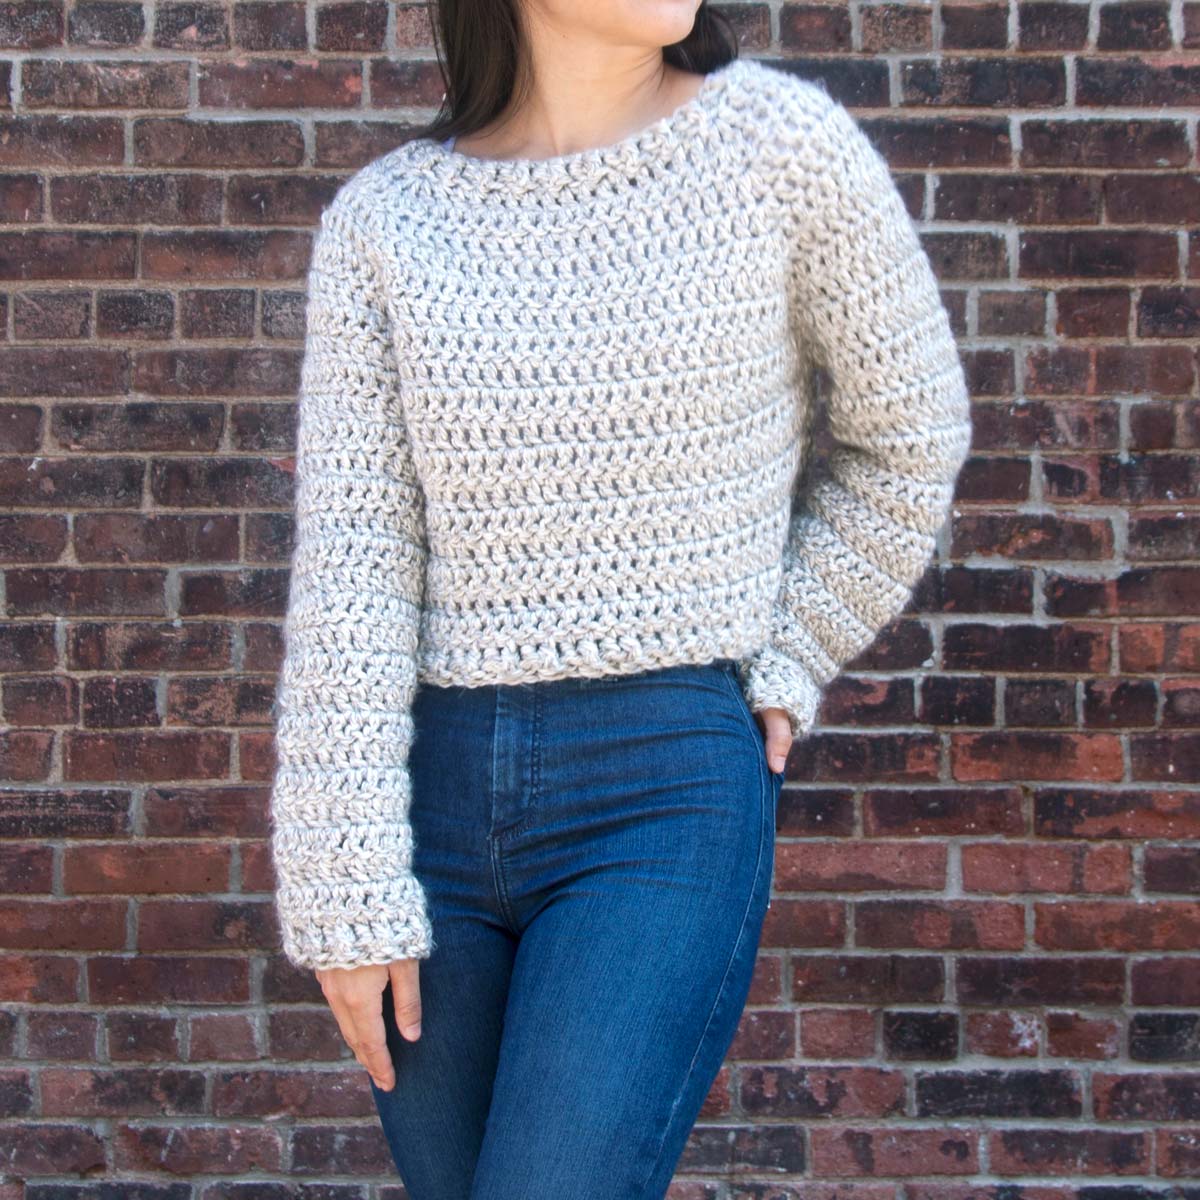 25 Free & Easy Sweater Knitting Patterns (Great for Beginners!)